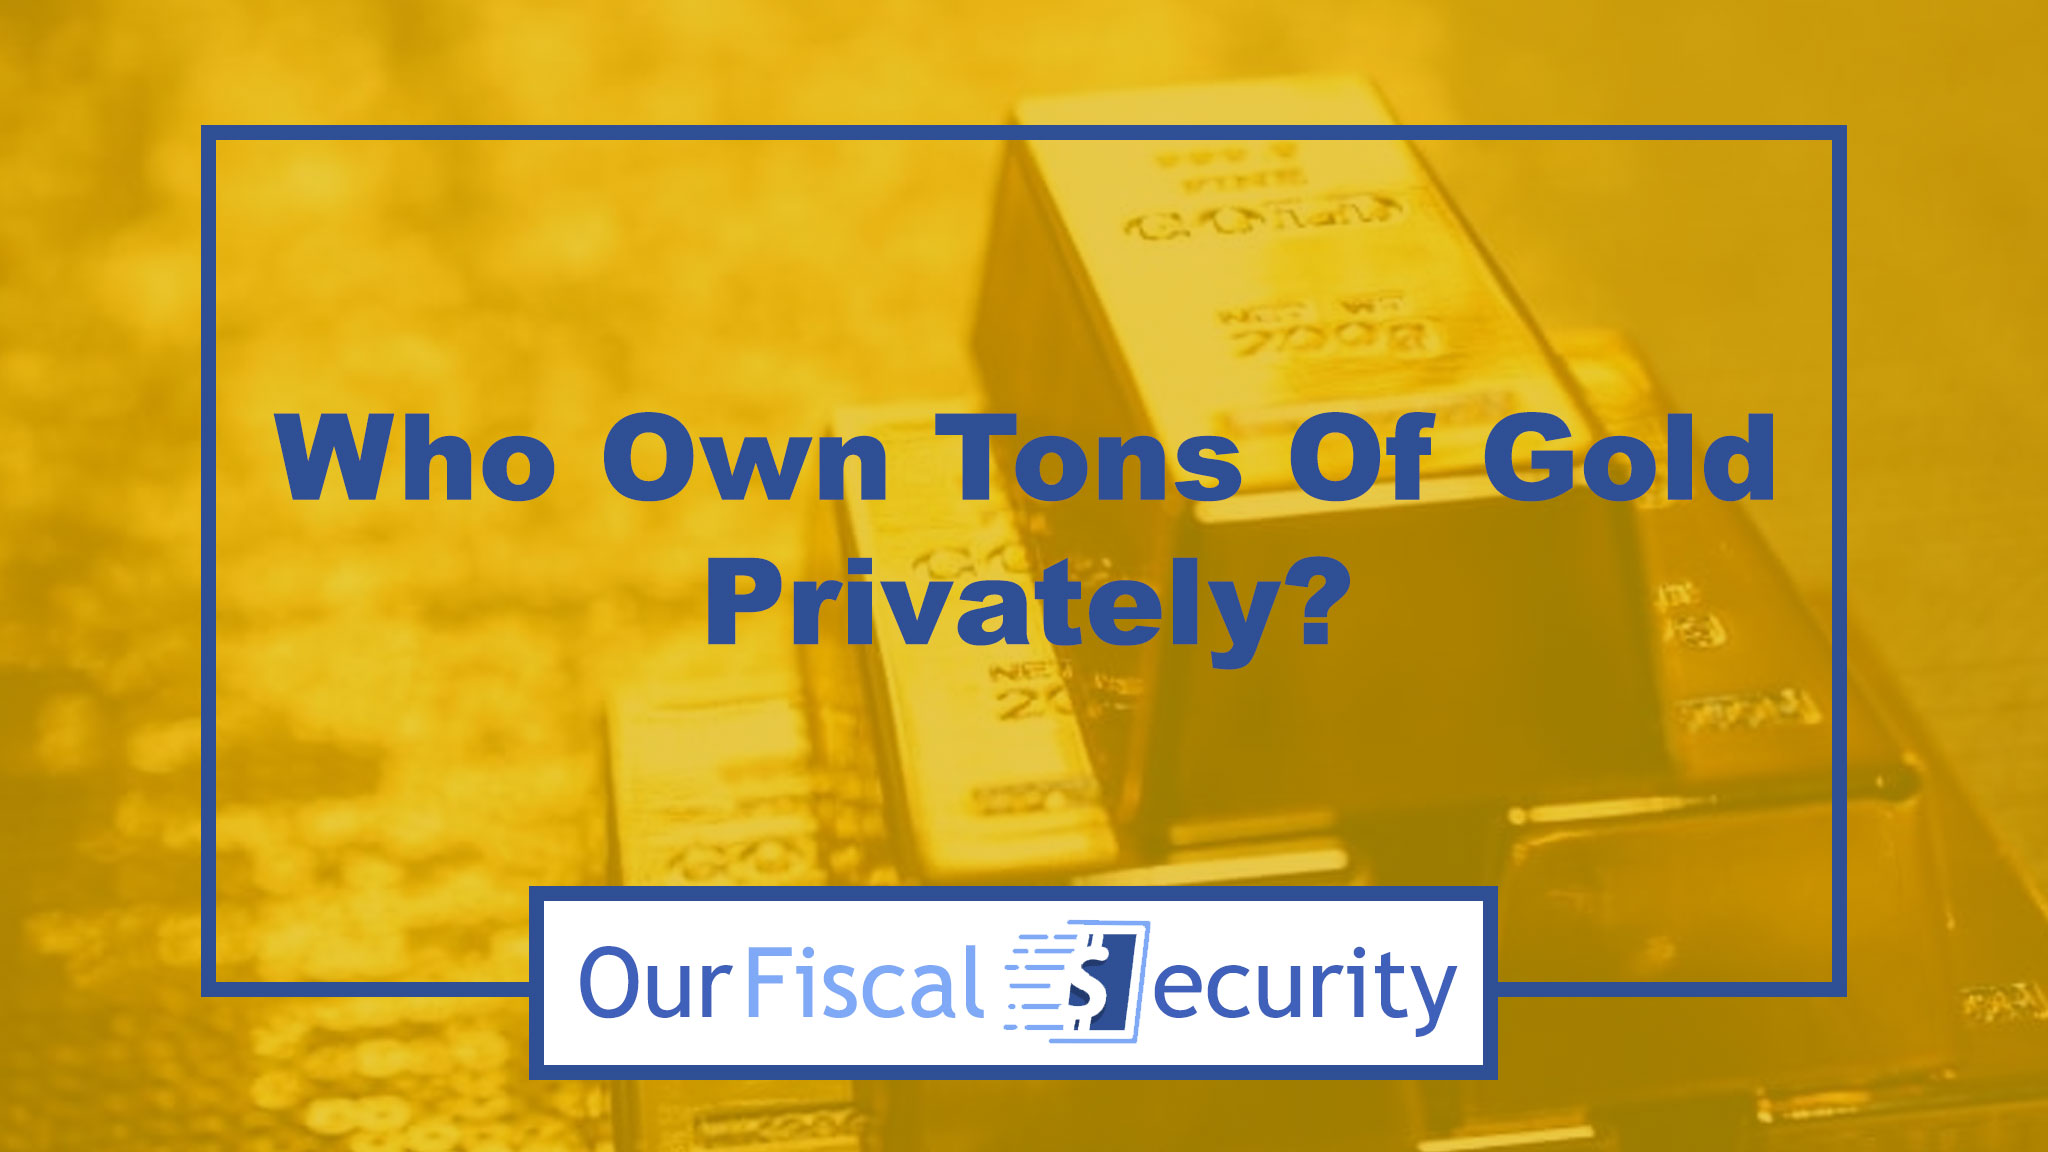 Who Owns Lots Of Gold Privately?